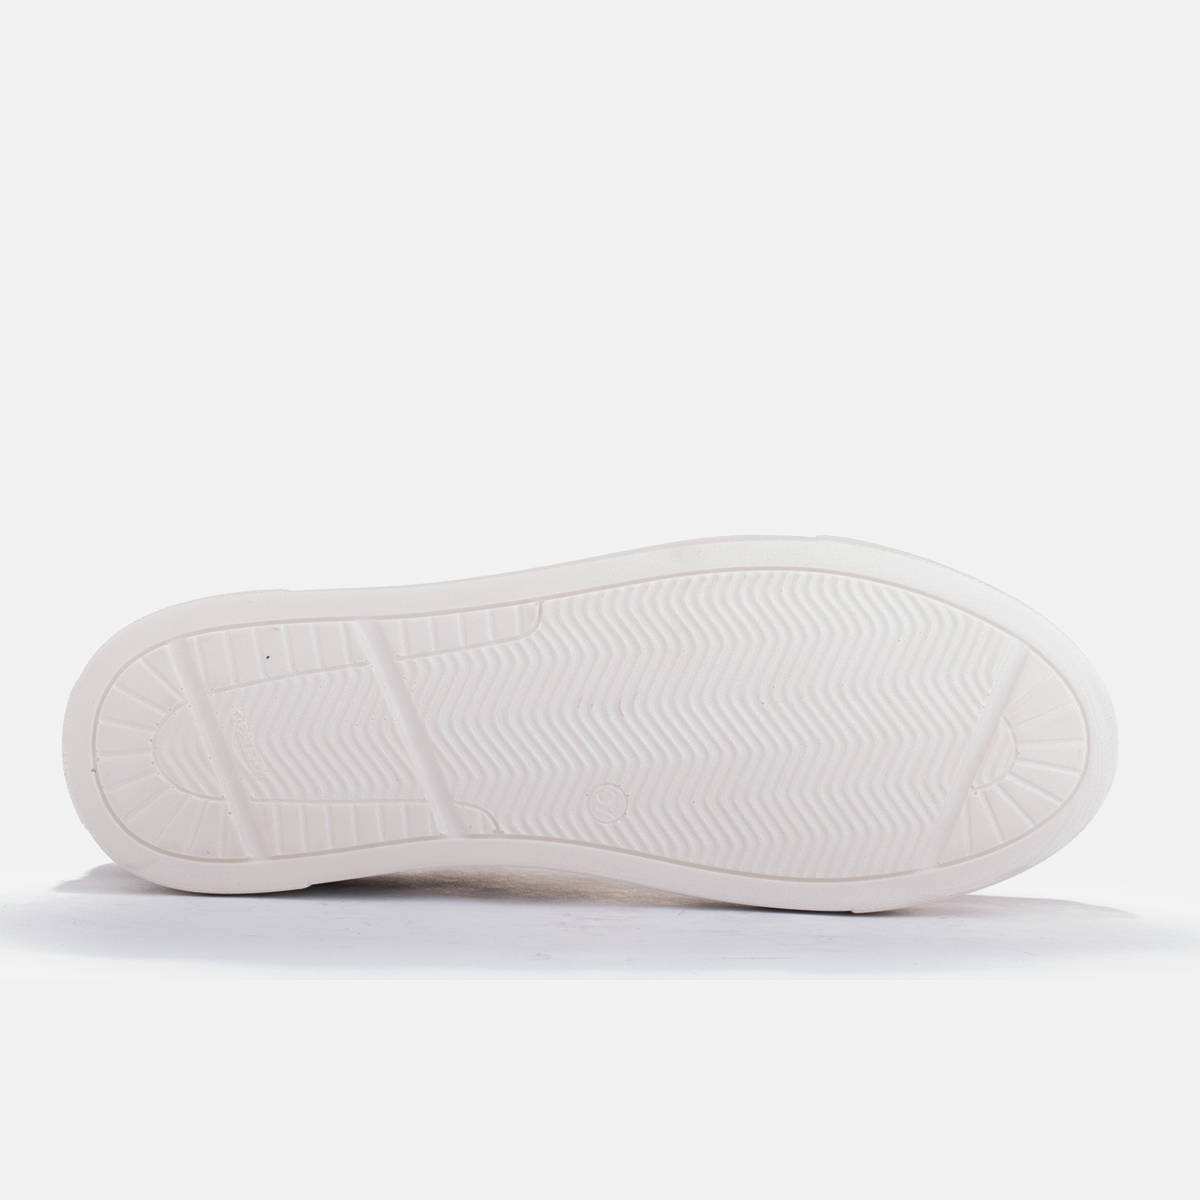 Light sneakers on a thick sole